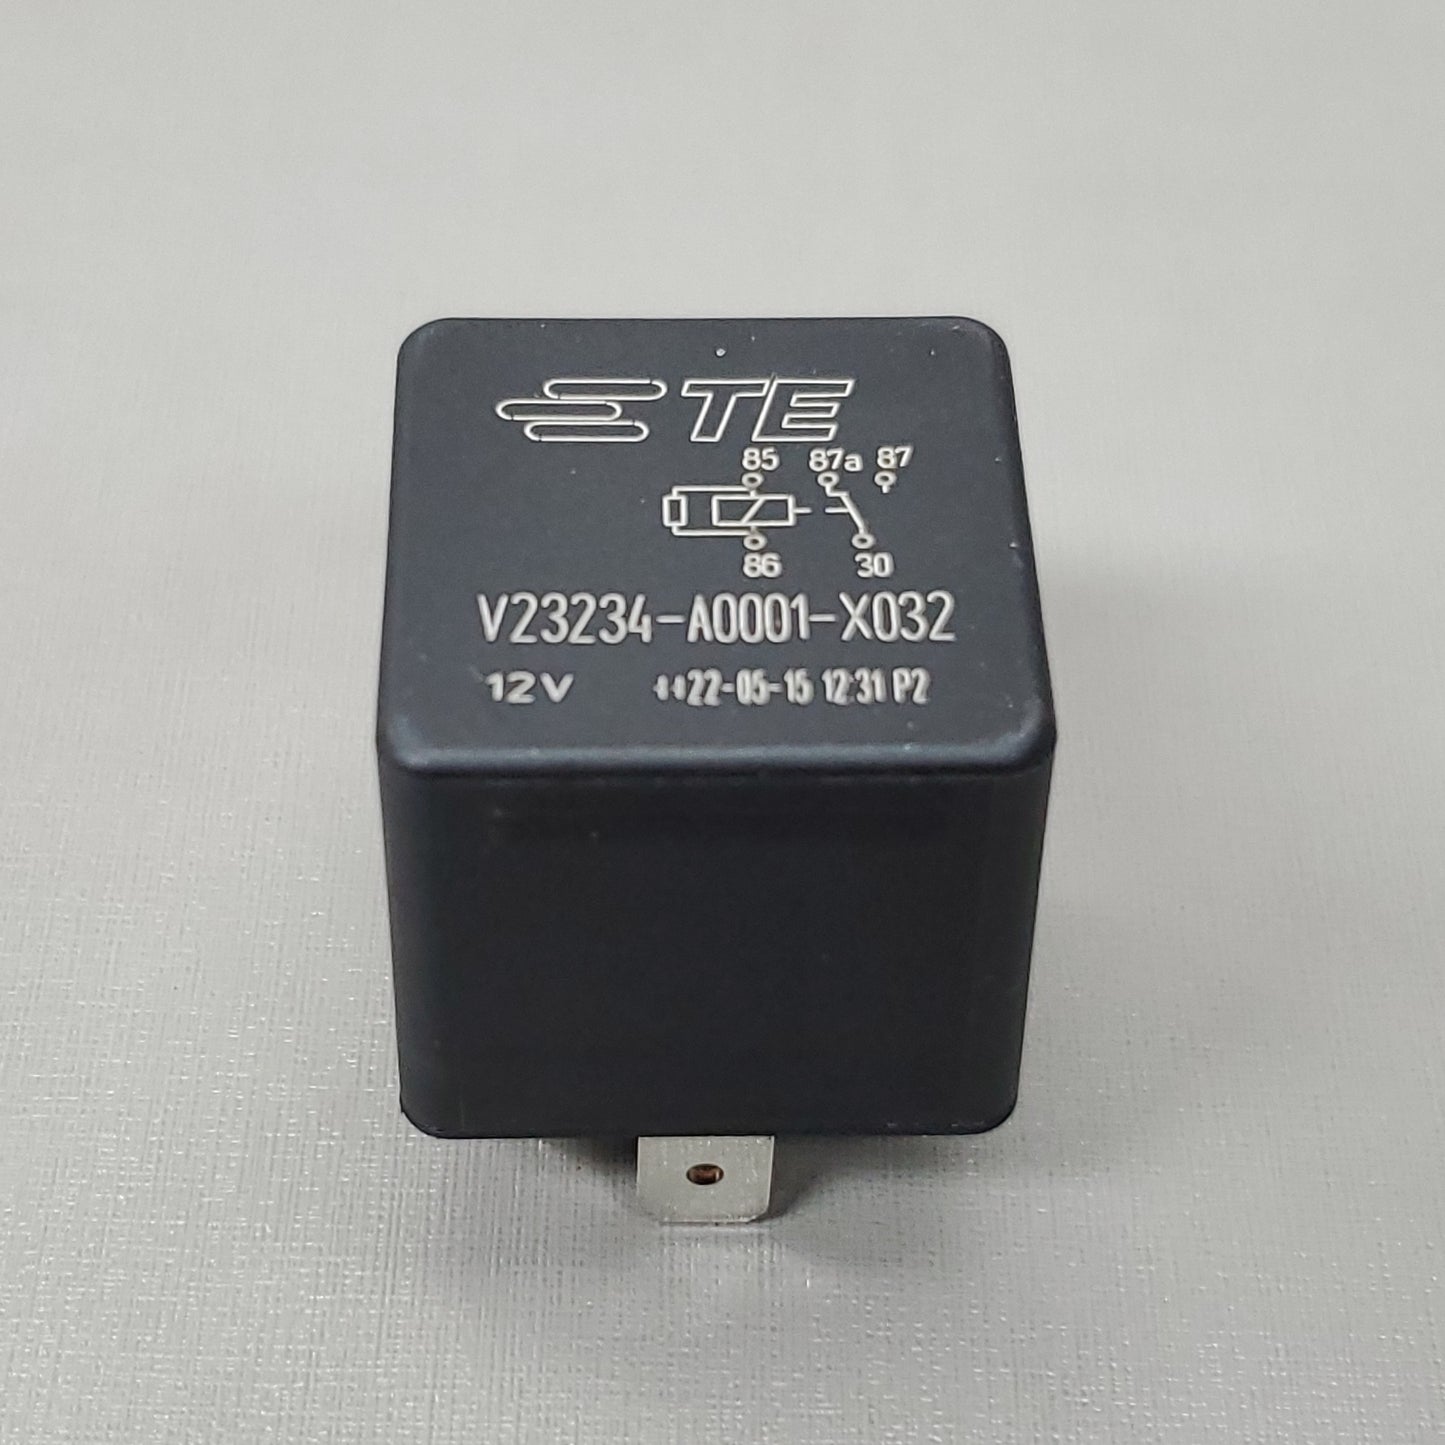 TE connectivity 15 Pack of TRP 12V Relay Switches V23234-A0001-X032 CB12650 (New)